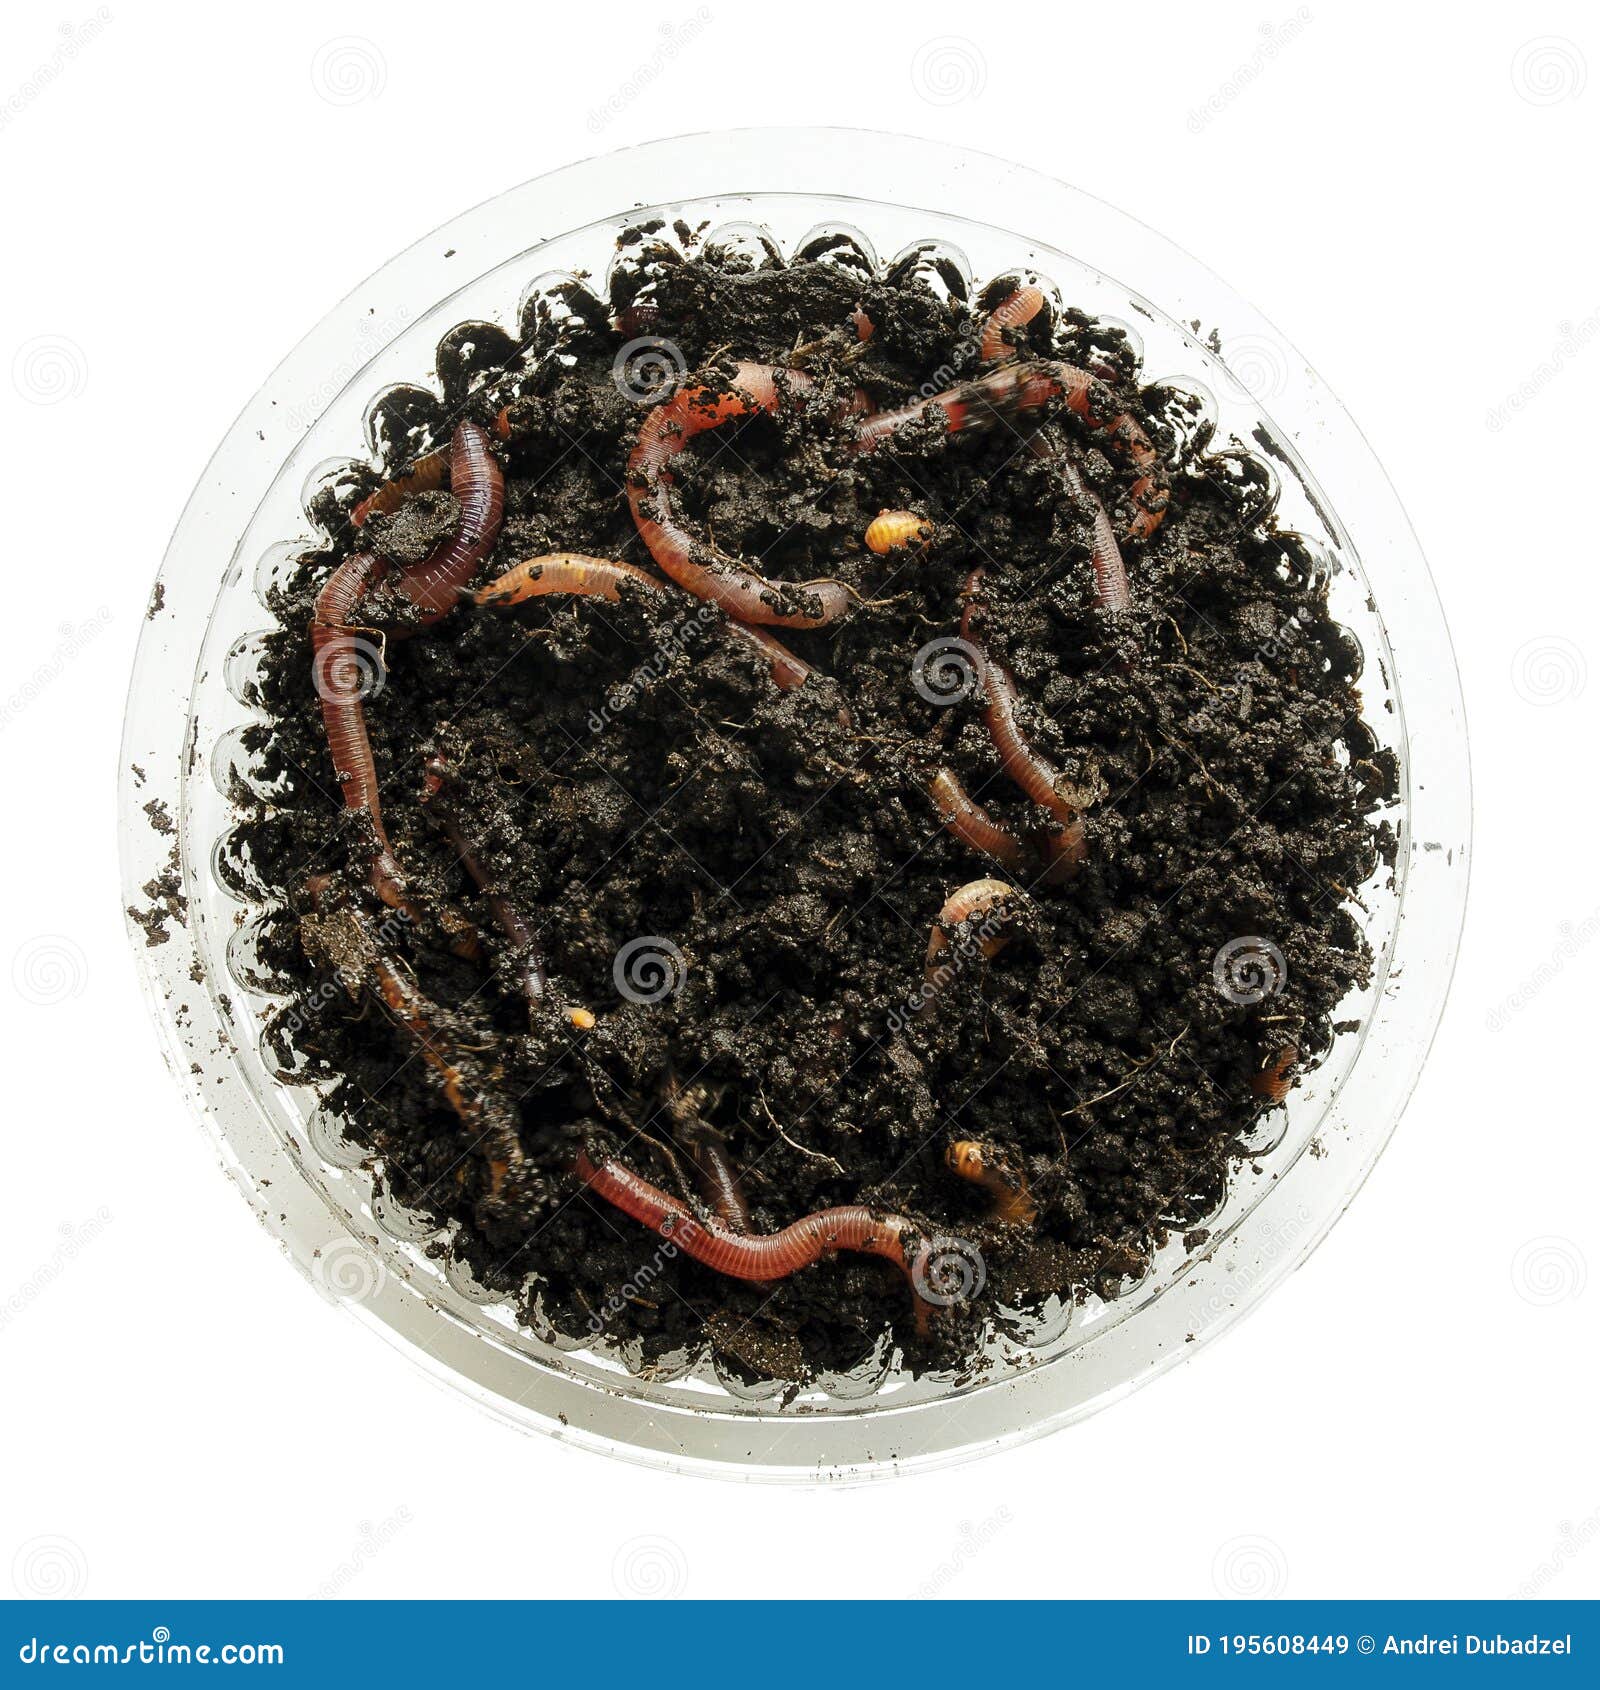 Red Worms in a Box in the Manure Isolated on a White Background. Fishing  Worms, Top View. Box with Worms Isolated on Stock Image - Image of crawl,  nature: 195608449